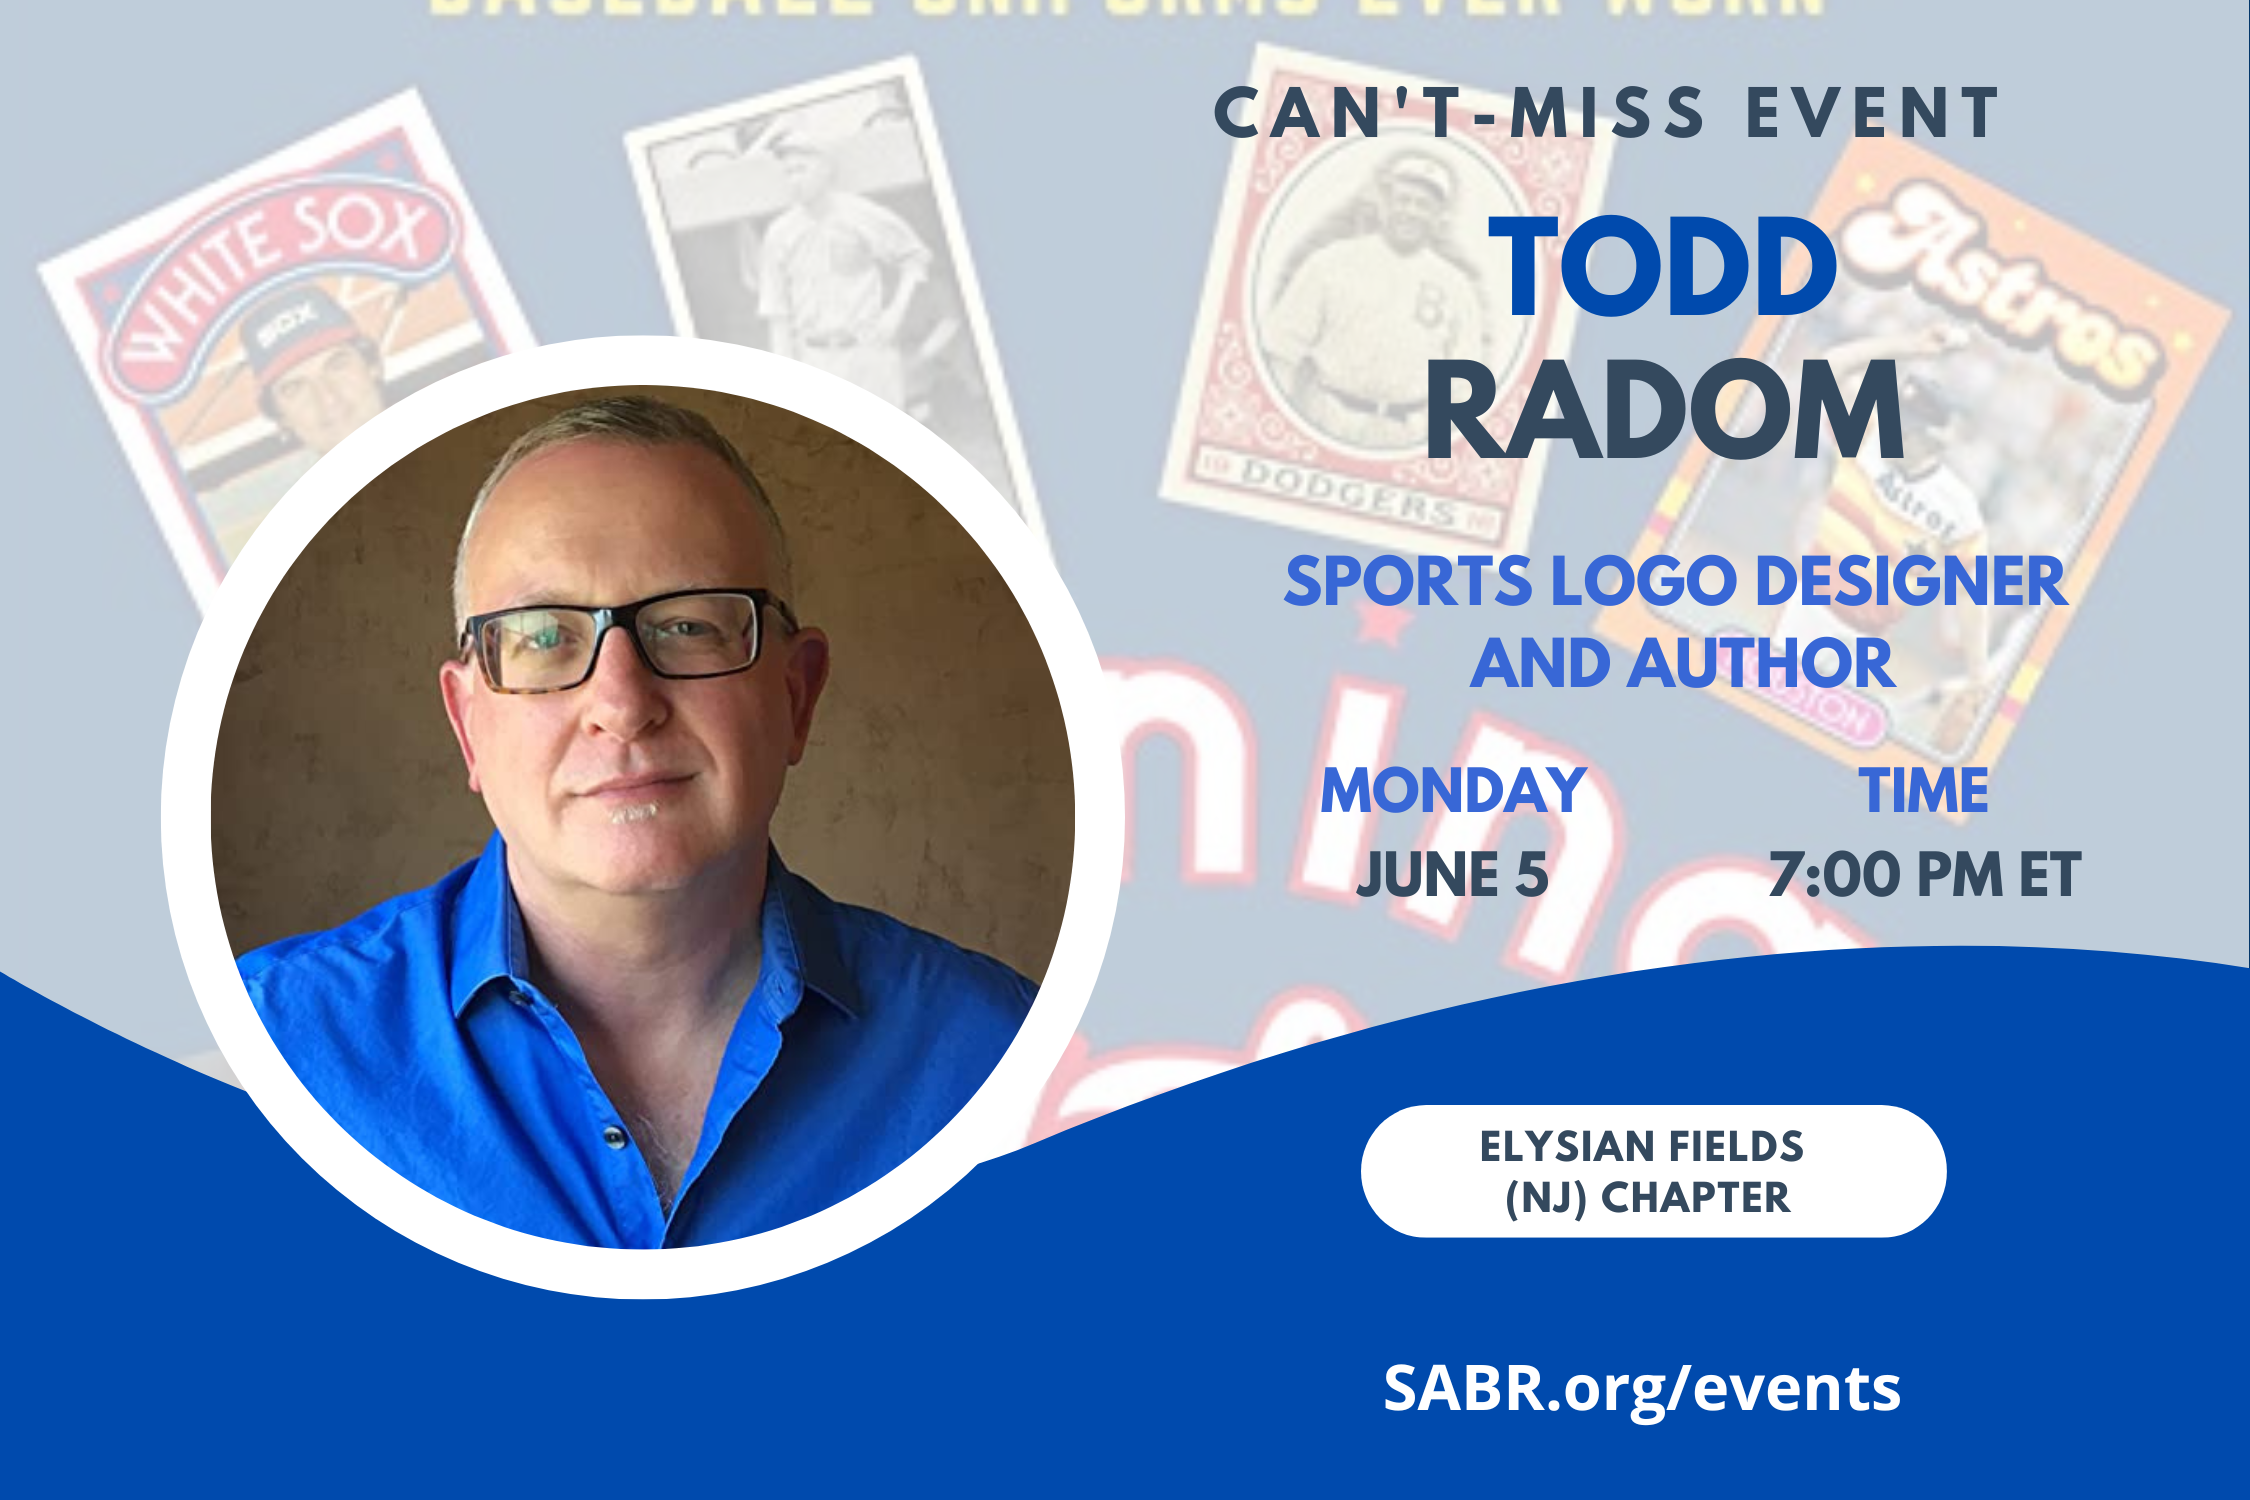 SABR’s Elysian Fields Chapter in Northern New Jersey will have its next Zoom chapter meeting on Monday, June 5 at 7:00-8:30 p.m. ET. All baseball fans are welcome to attend. Our guest speaker is SABR member and sports logo designer Todd Radom.